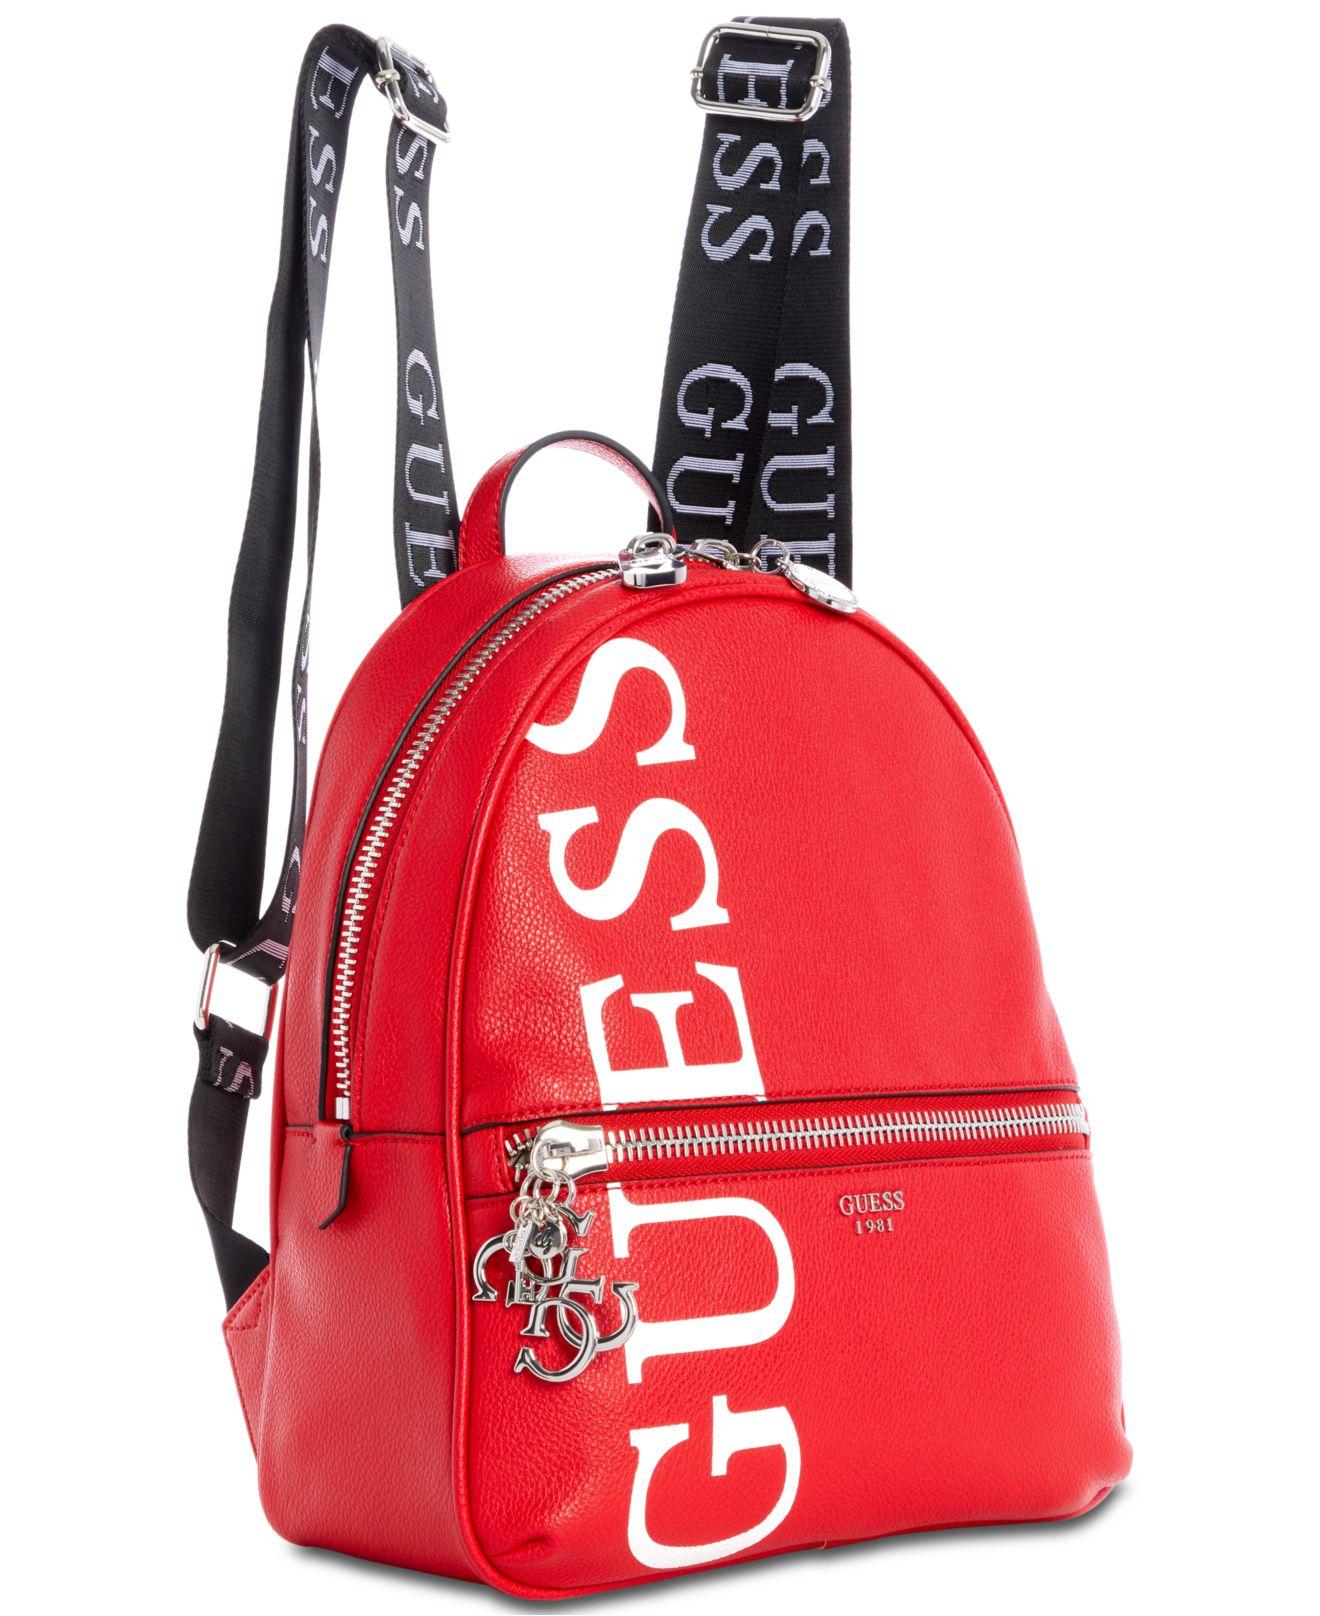 Guess Backpack Red | lupon.gov.ph